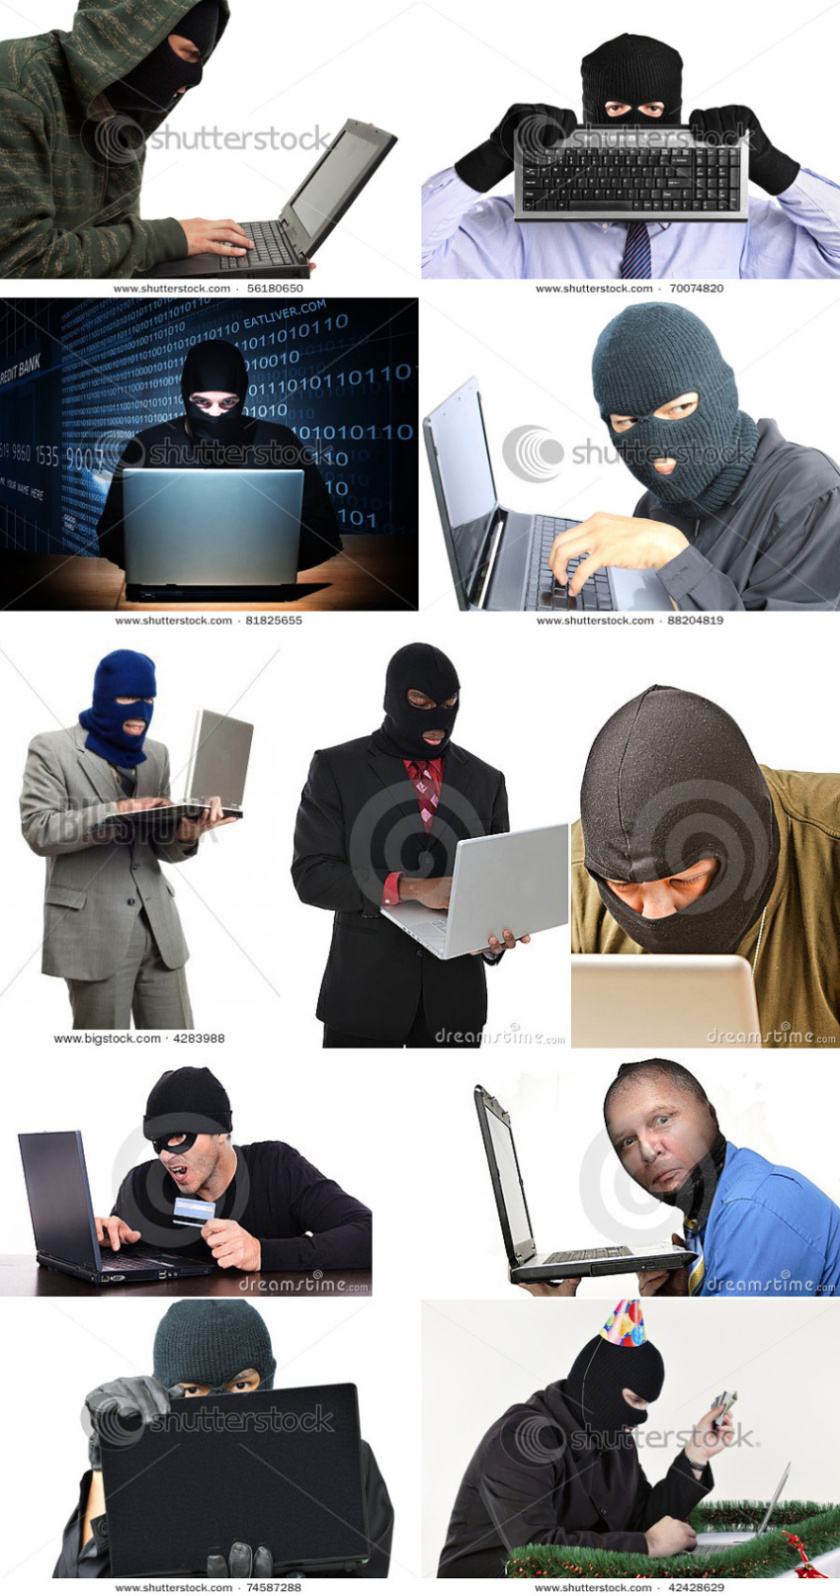 Obrázek How hackers look according to stock photo sites 17-12-2011